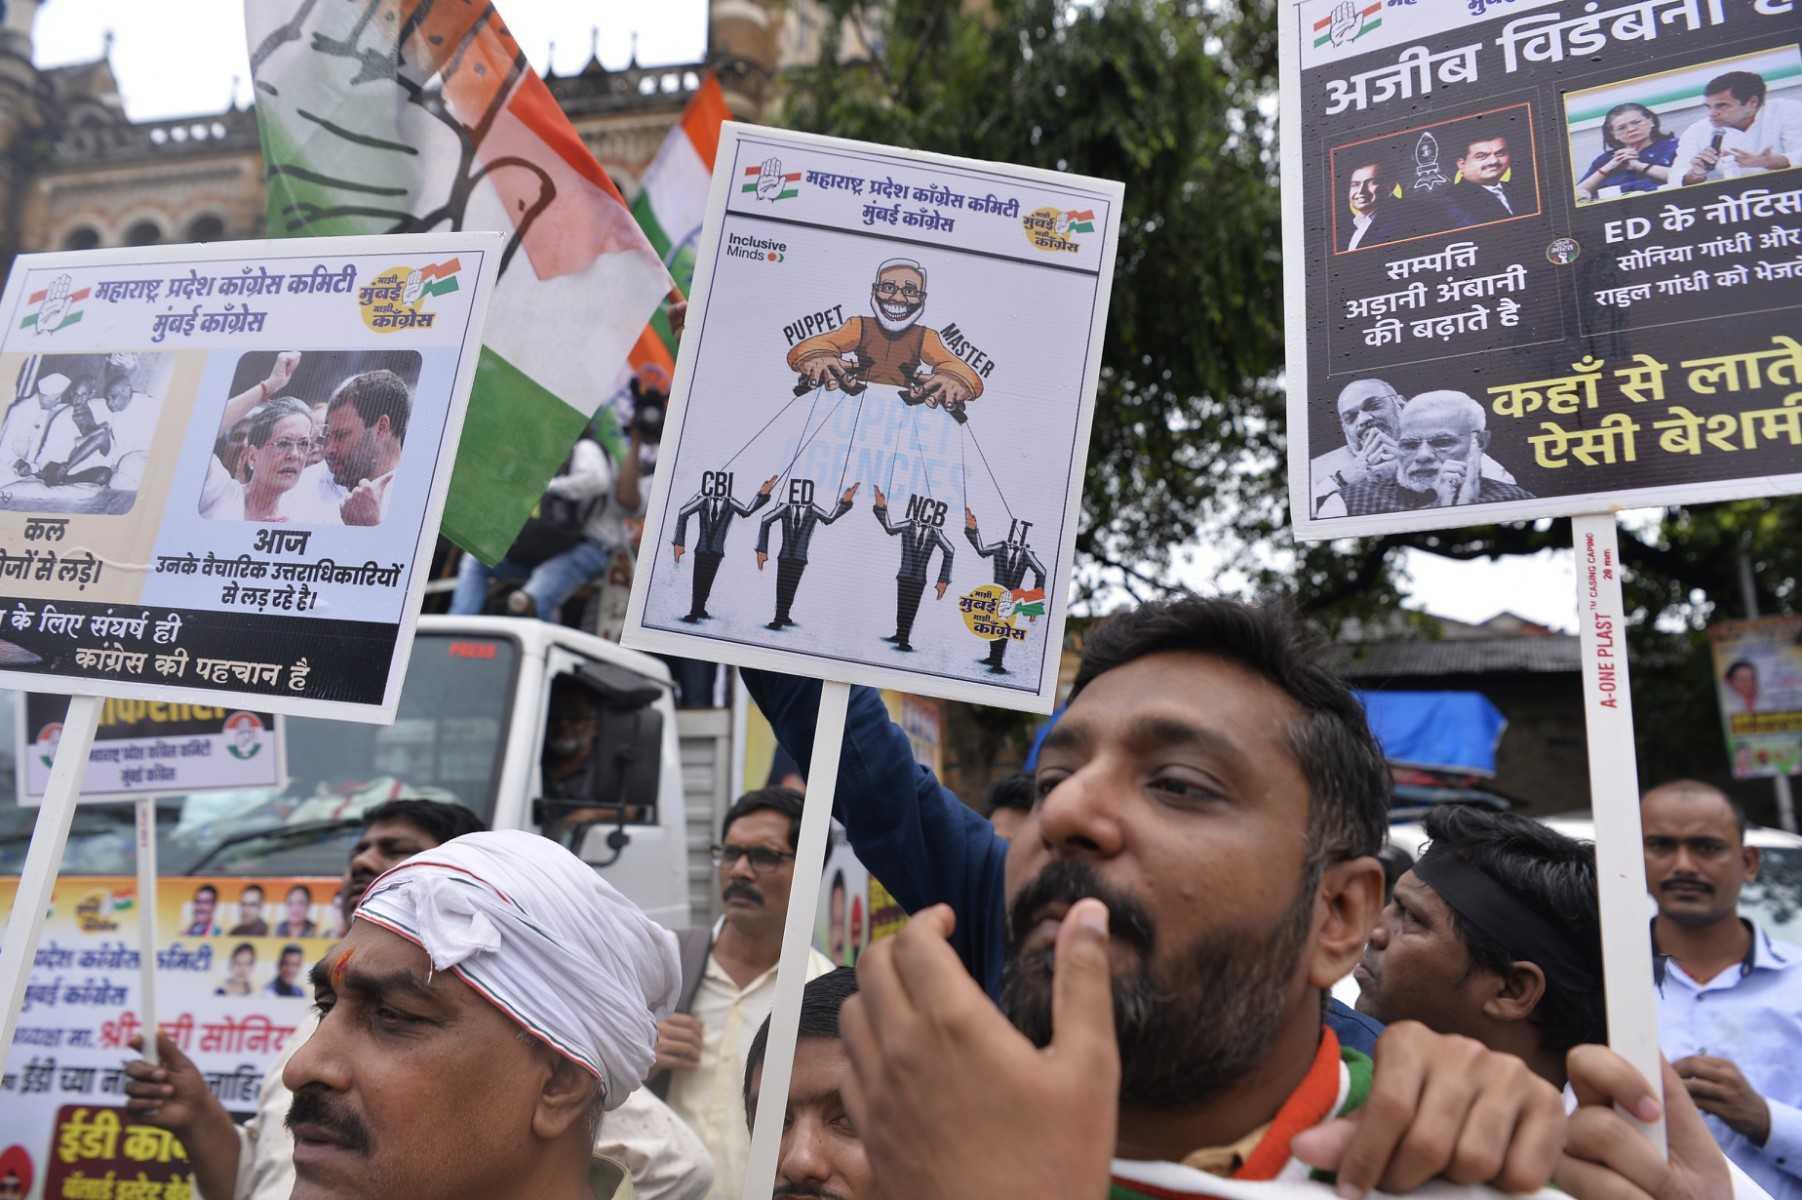 Congress party activists hold placards during a protest against the Enforcement Directorate for the questioning of party leader Sonia Gandhi in an alleged money laundering case, in Mumbai on July 21. Photo: AFP